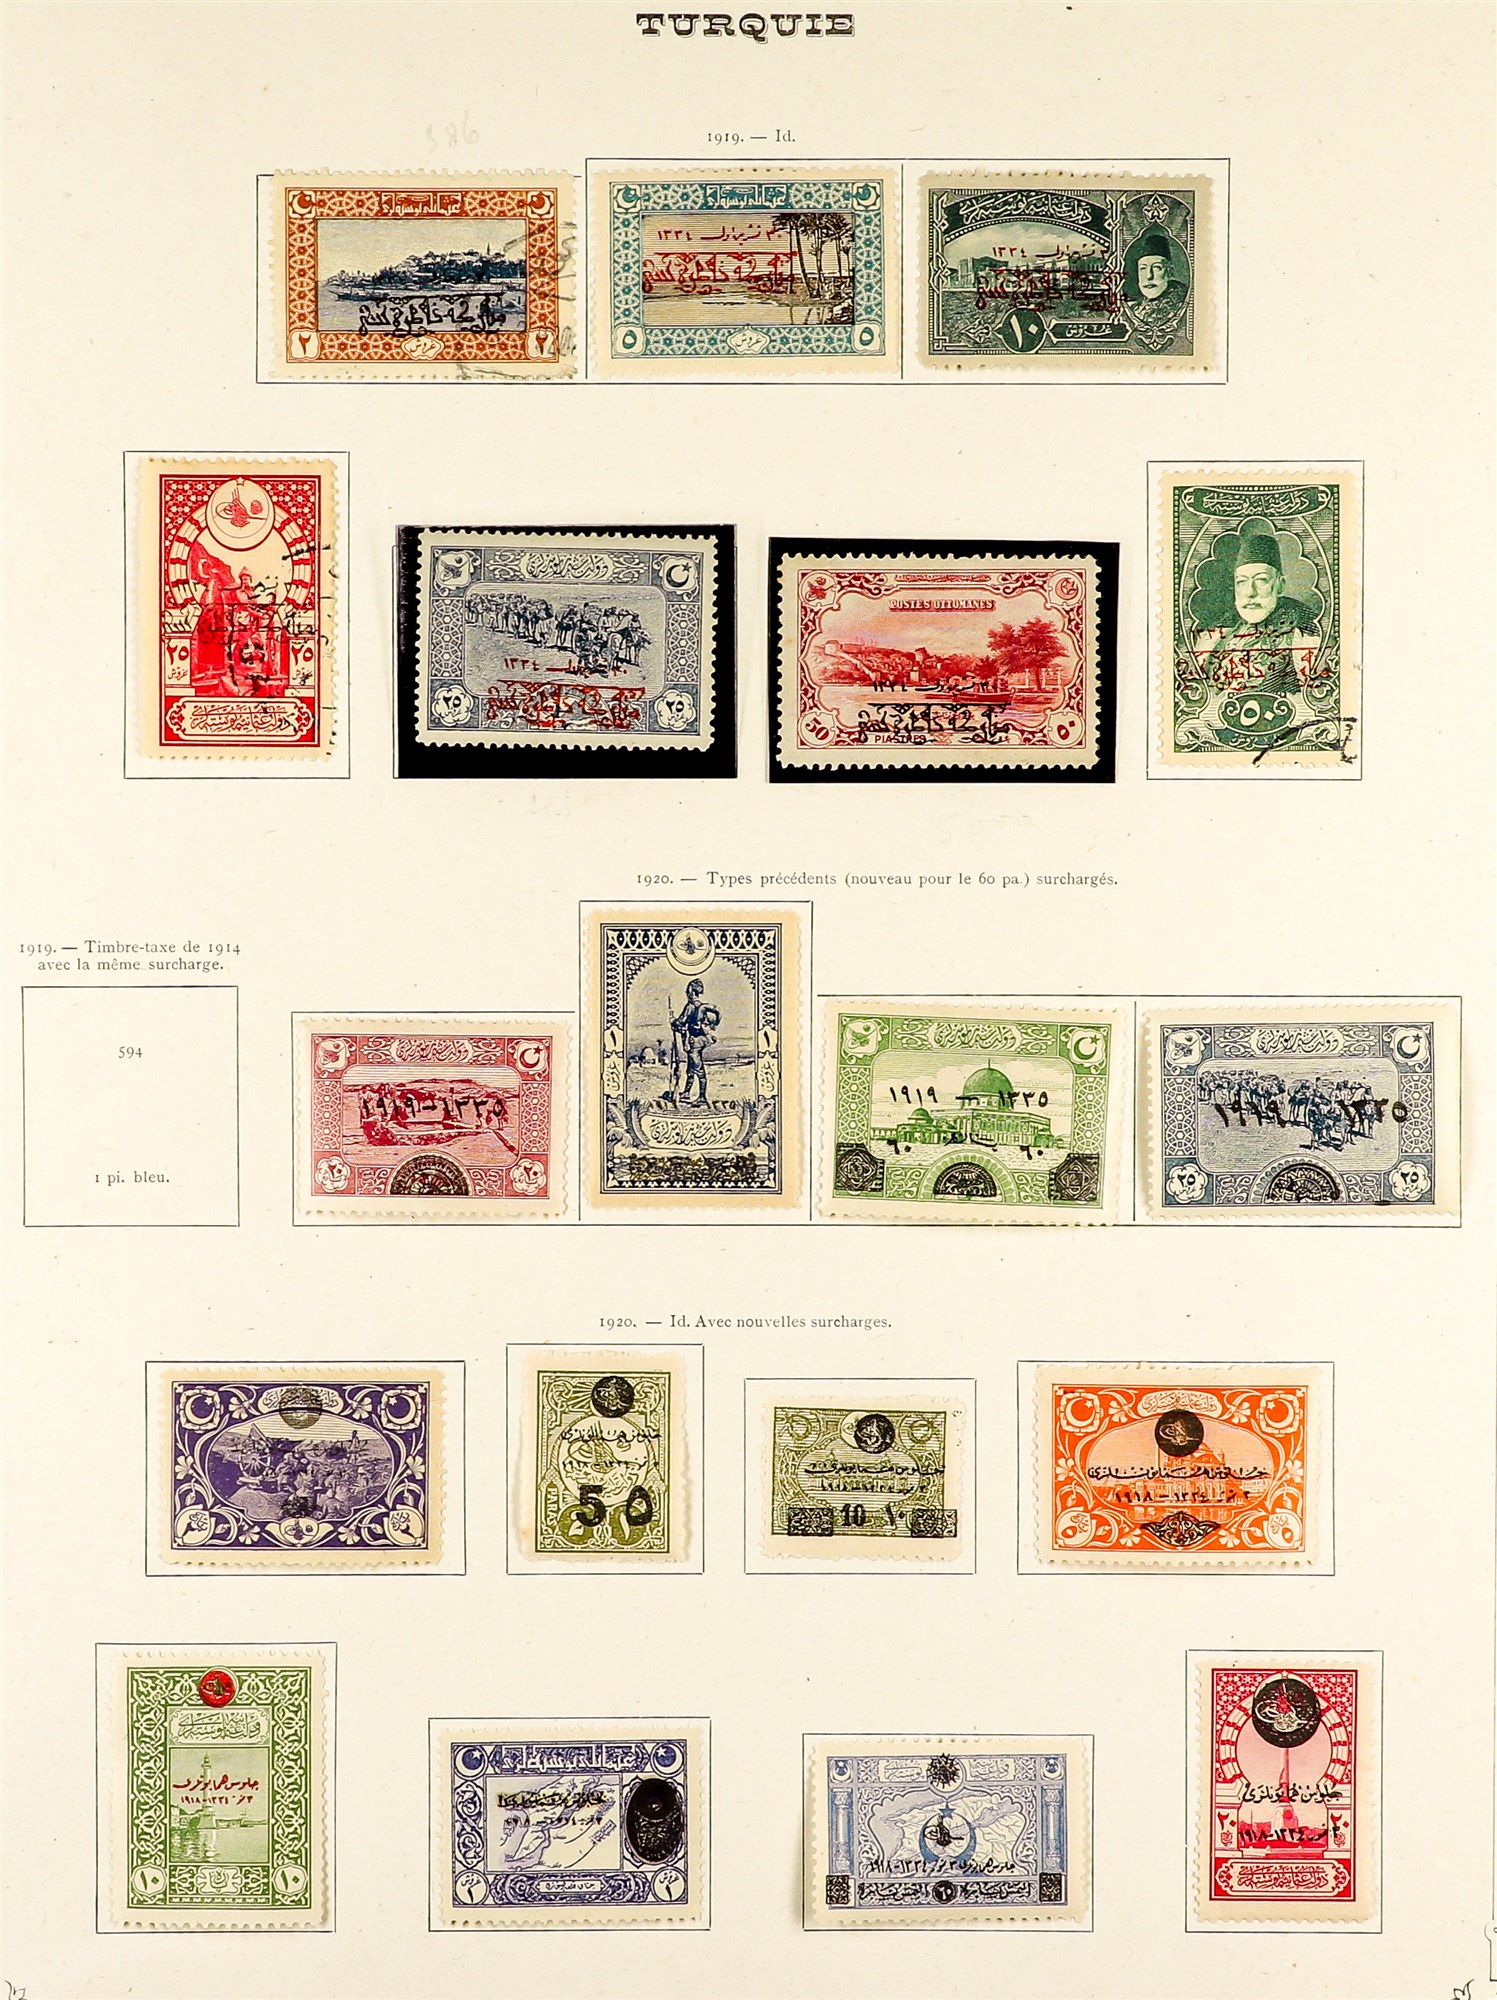 TURKEY 1865 - 1920 COLLECTION of 500+ mint and used stamps on album pages, 1865-69 Duloz types incl. - Image 10 of 12